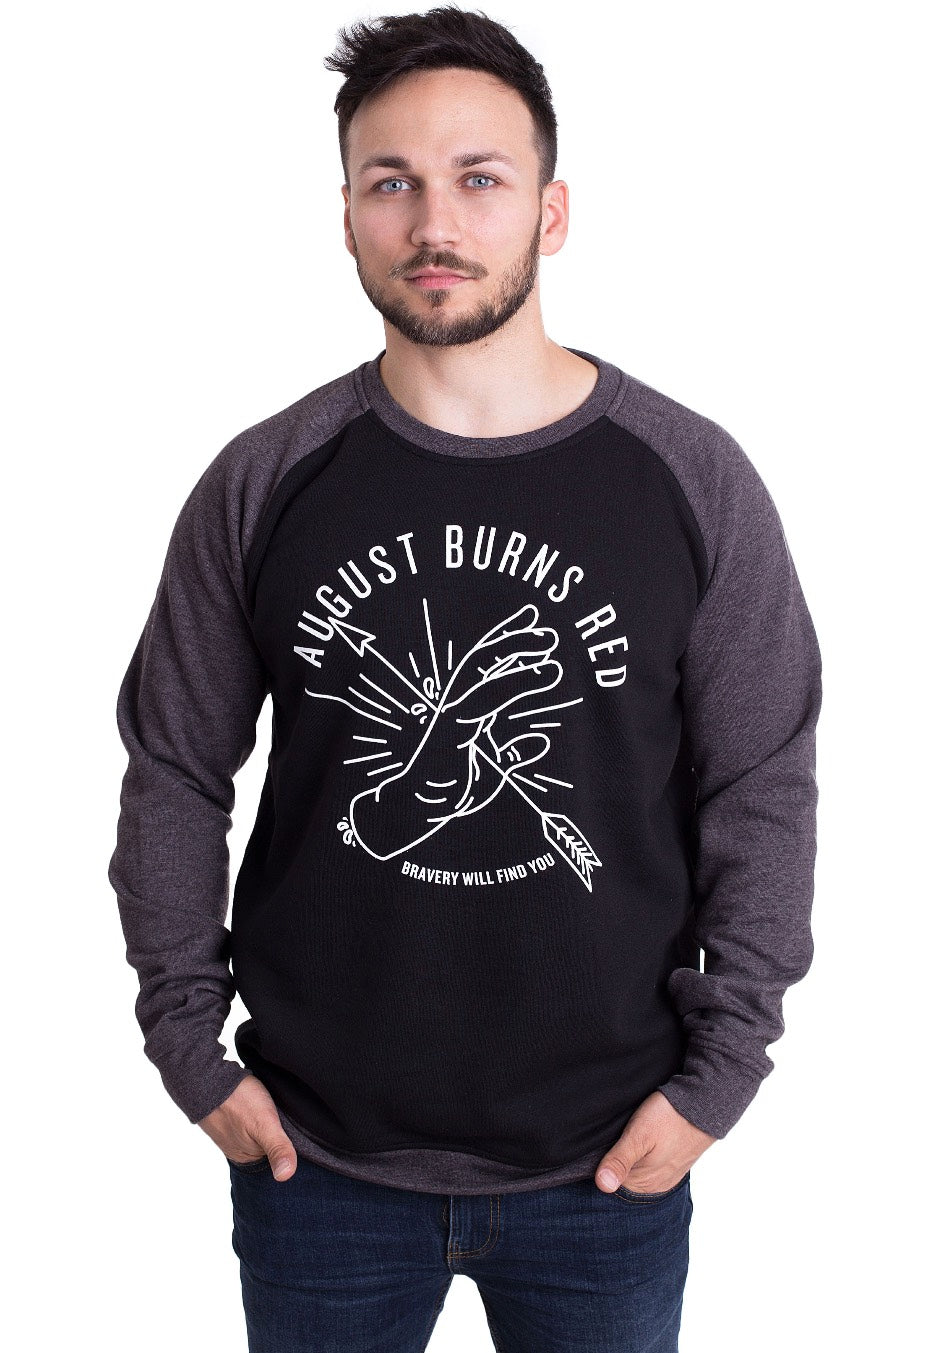 August Burns Red - Hand Black/Charcoal - Sweater | Men-Image